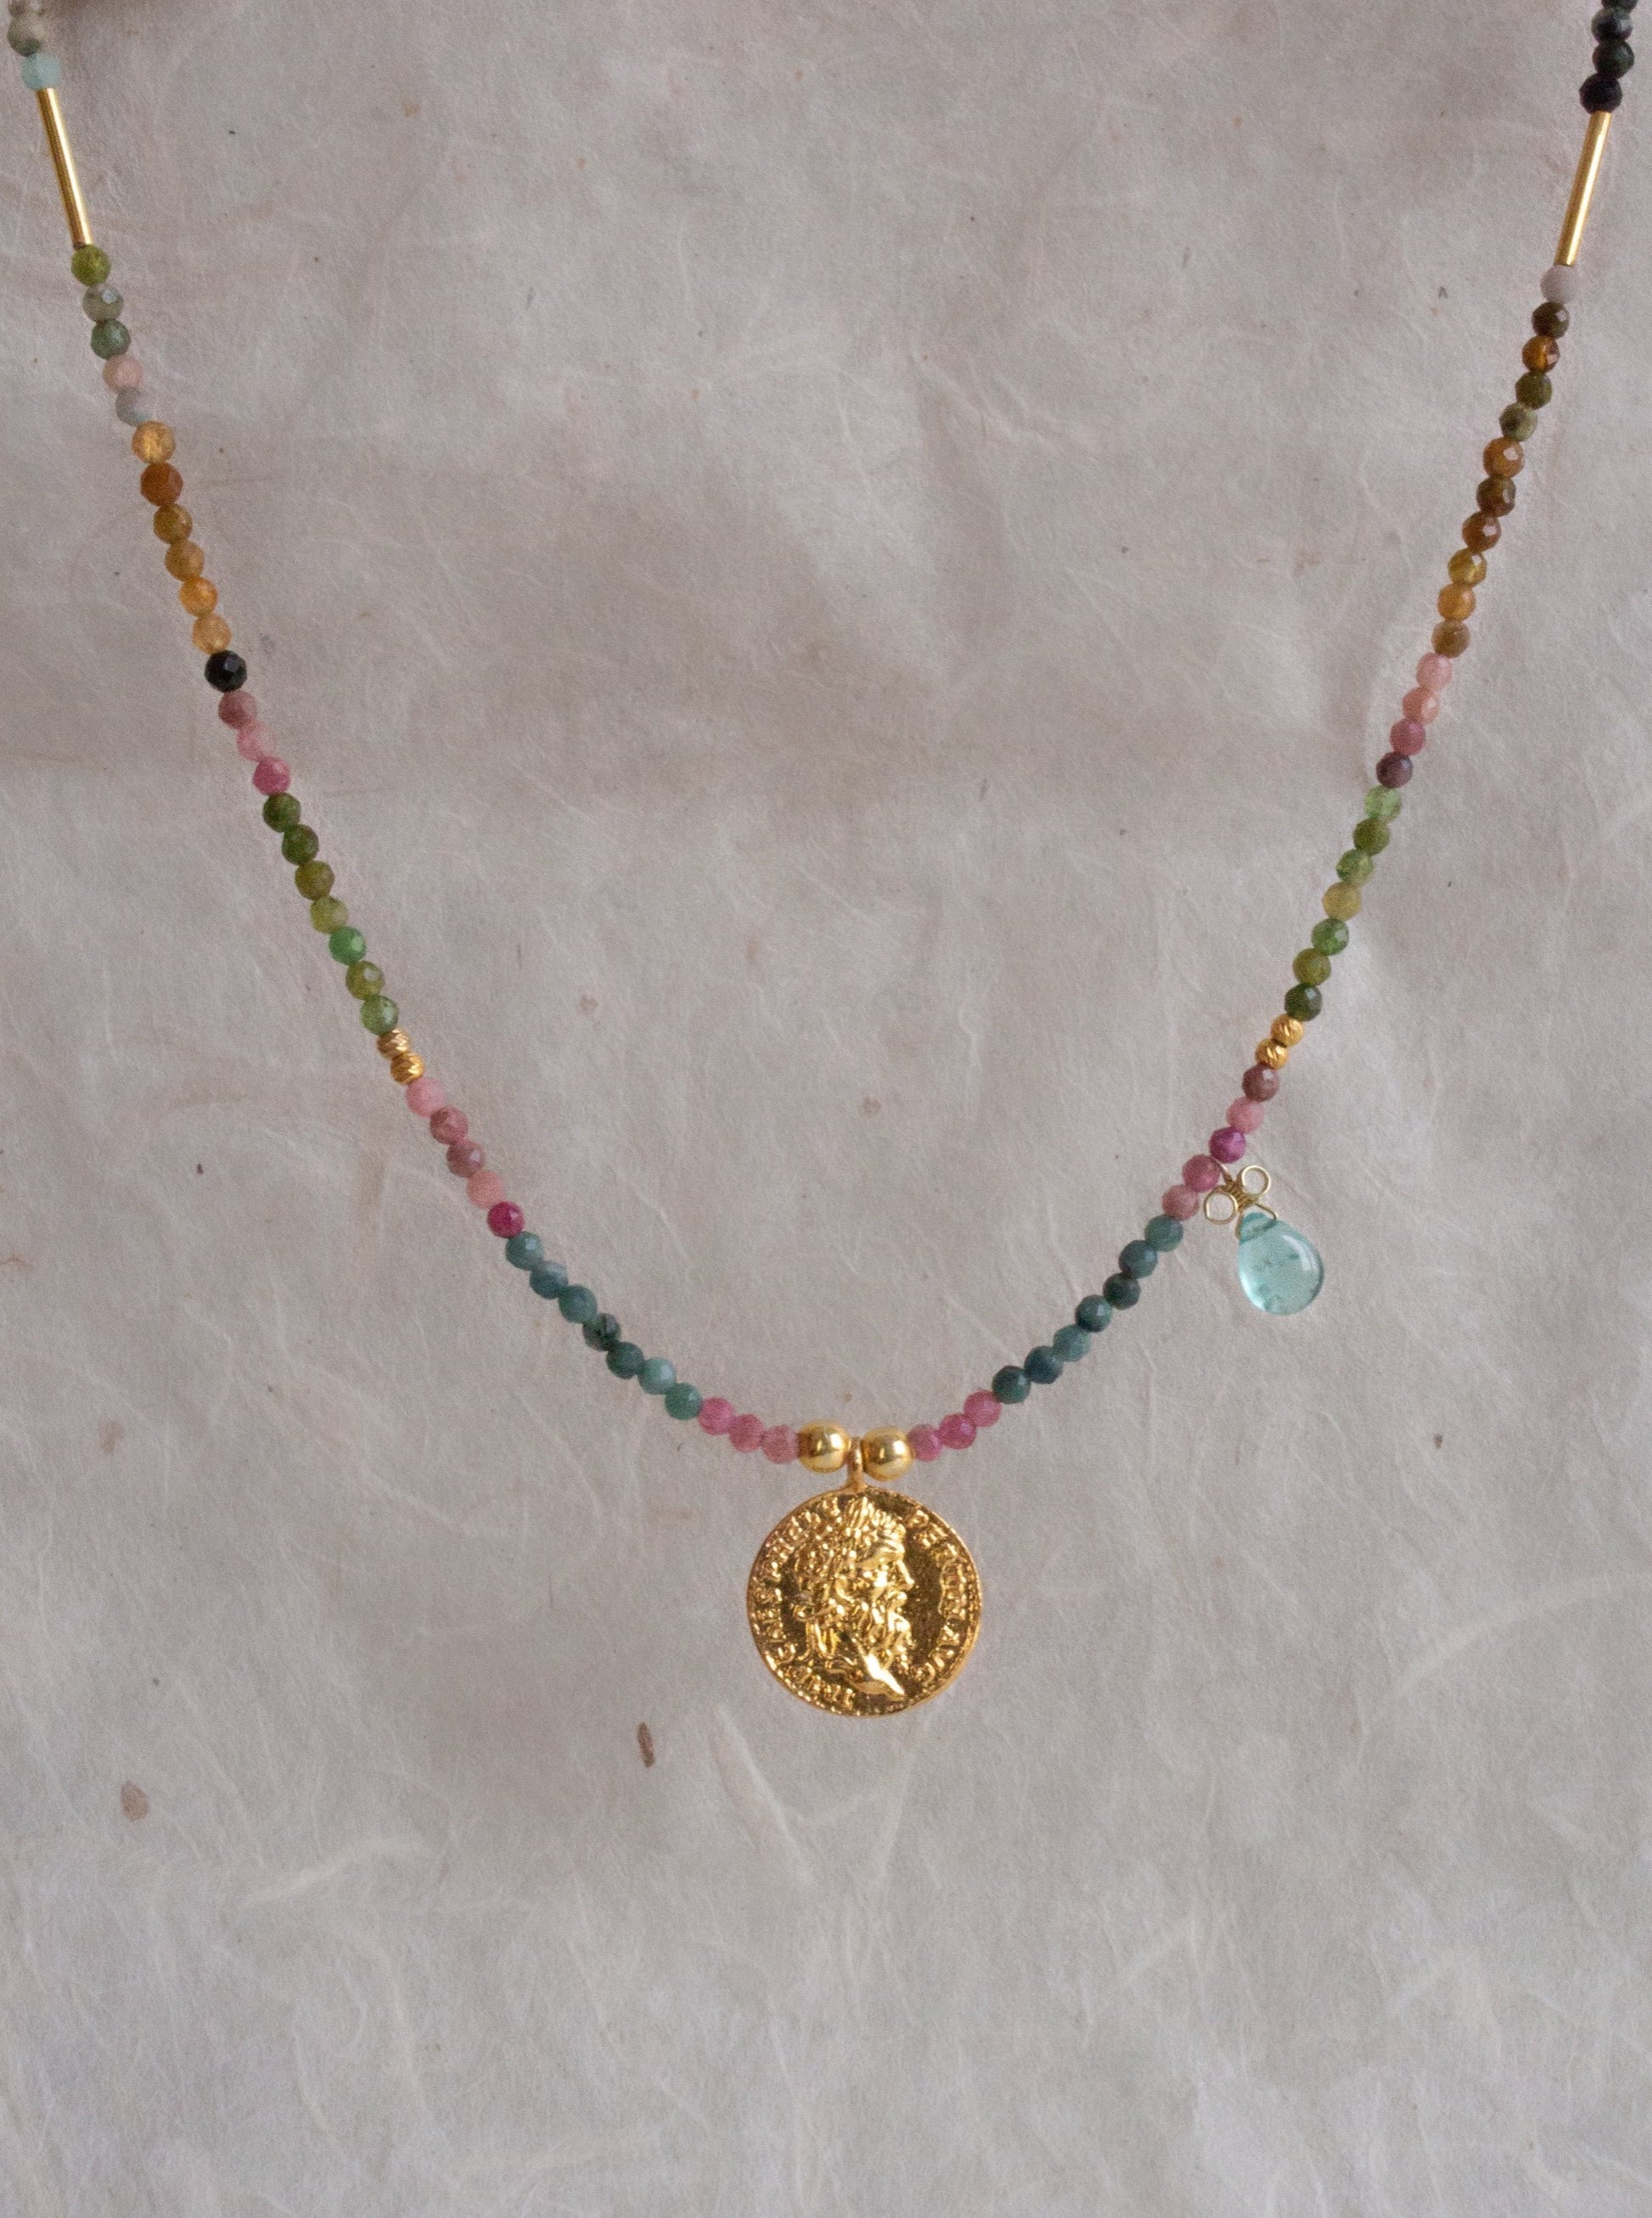 Zeus necklace with colourful tourmaline stones and a single aquamarine drop